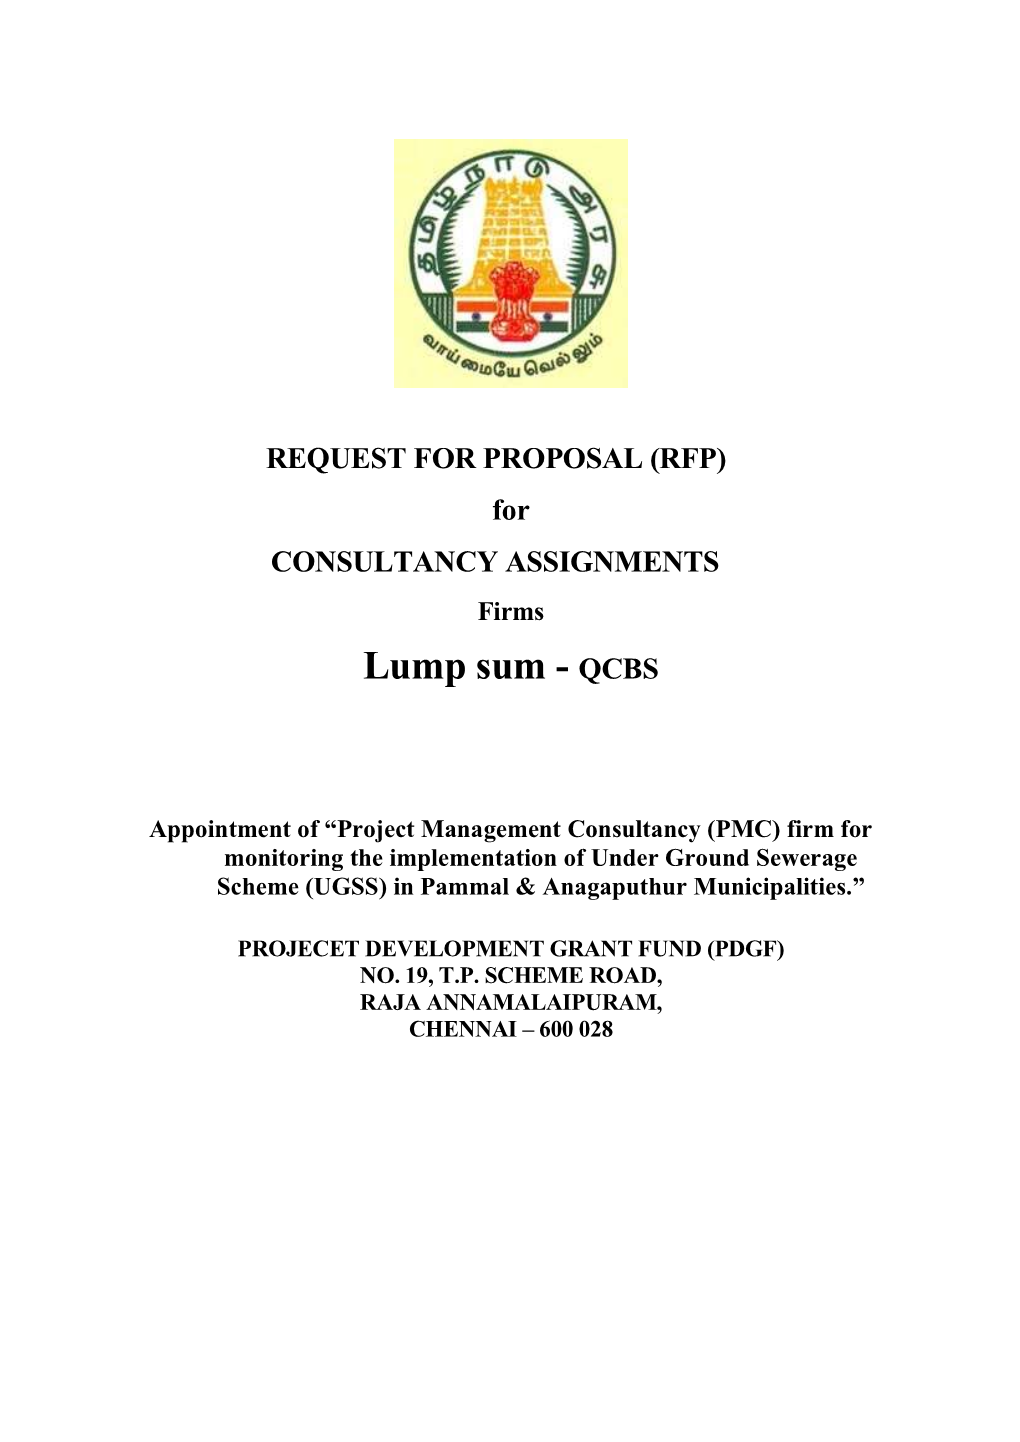 RFP:Appointment of “Project Management Consultancy